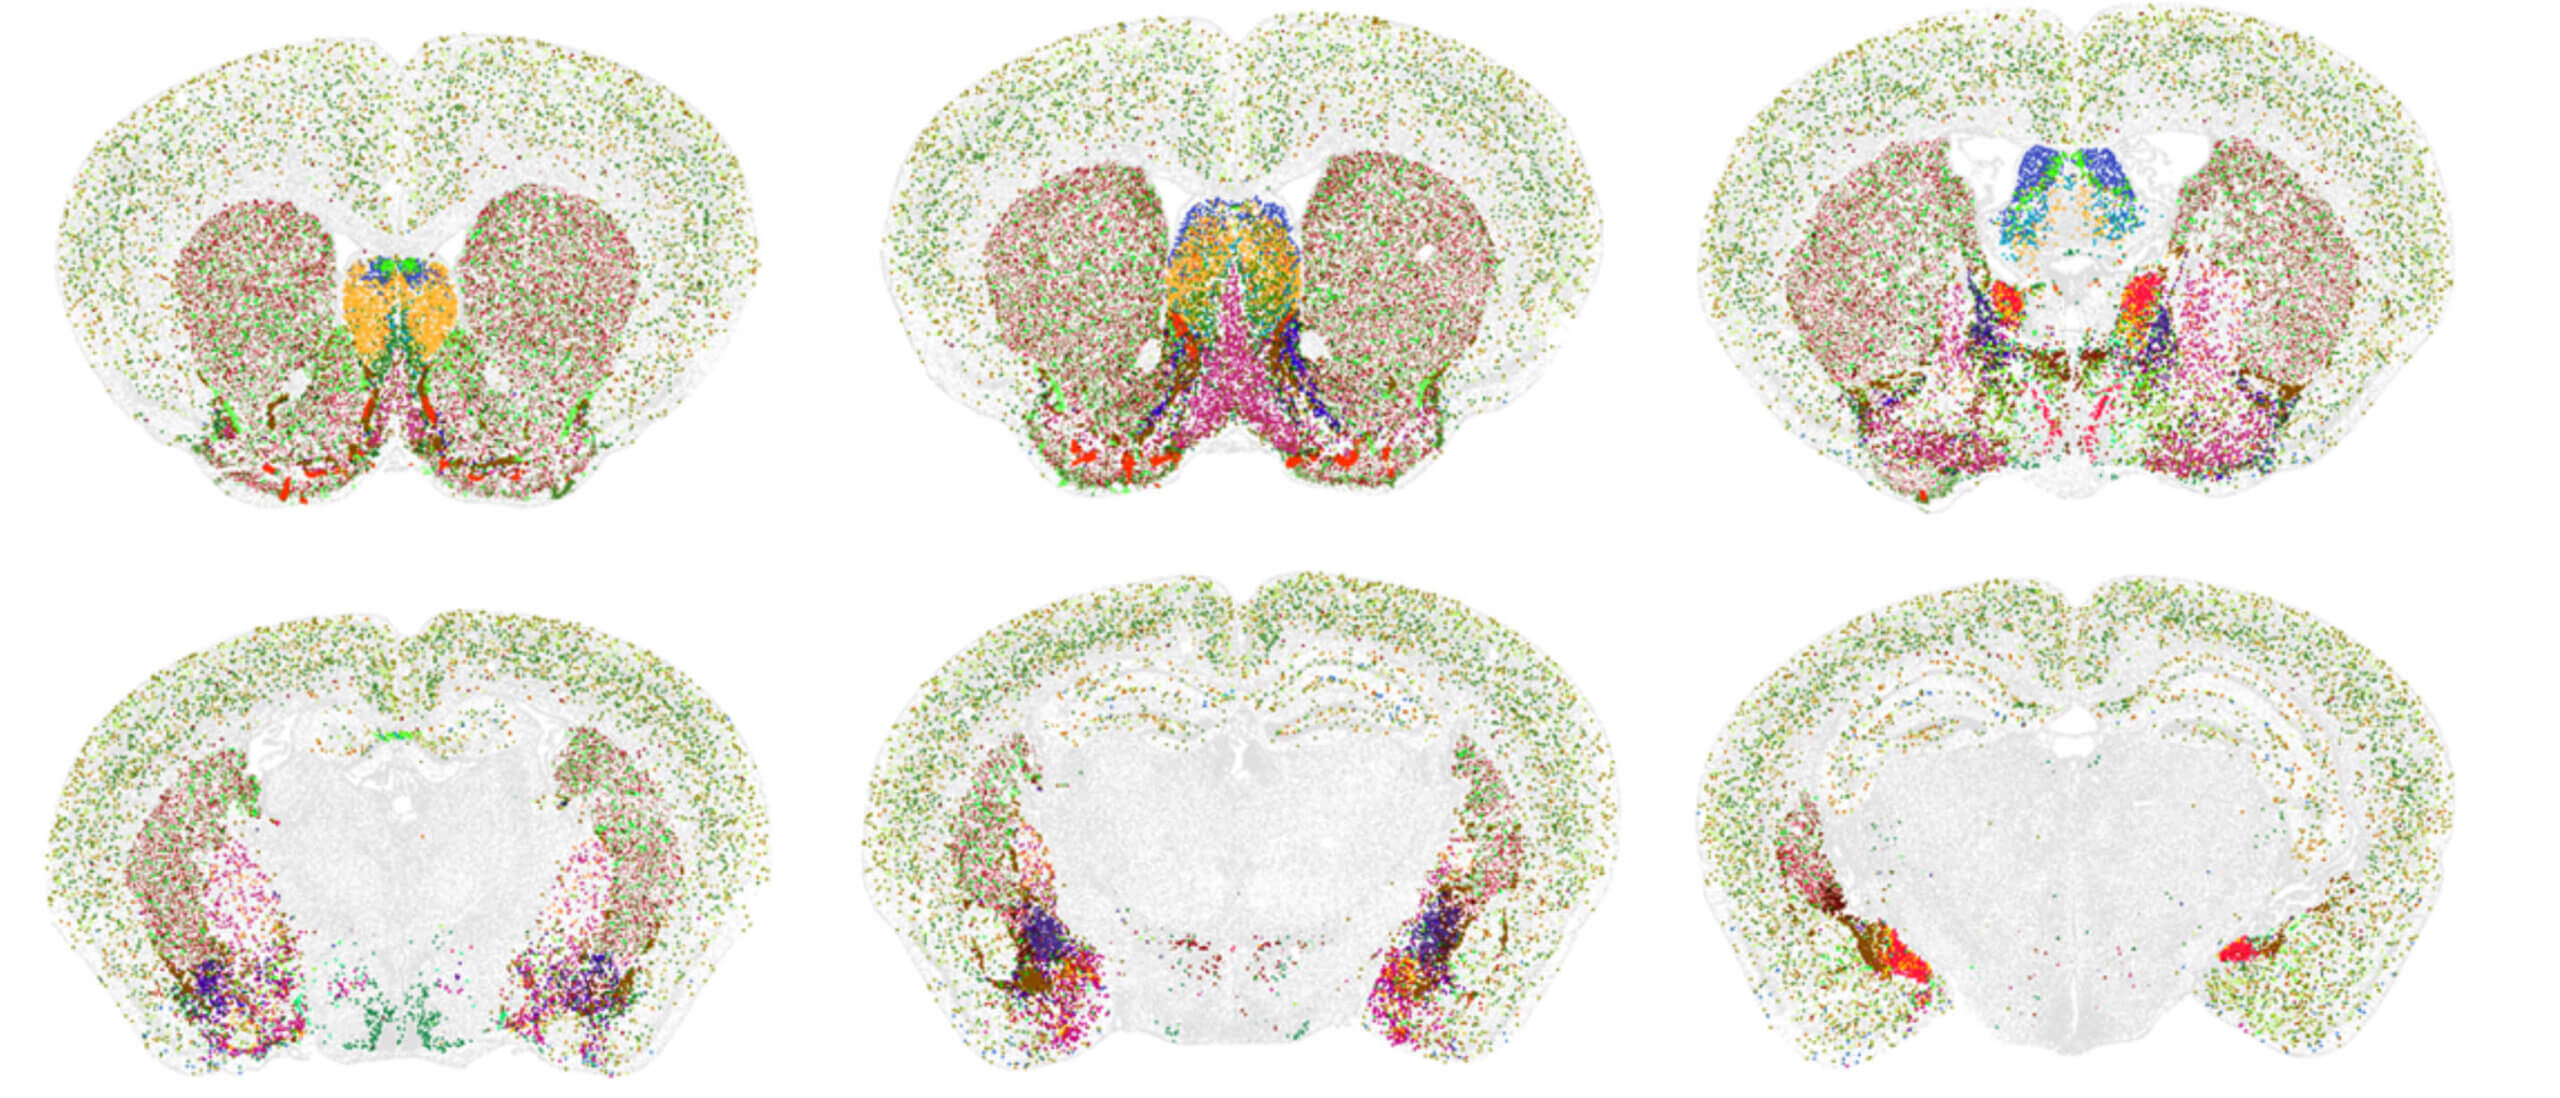 Six brains showing cells types in various colors